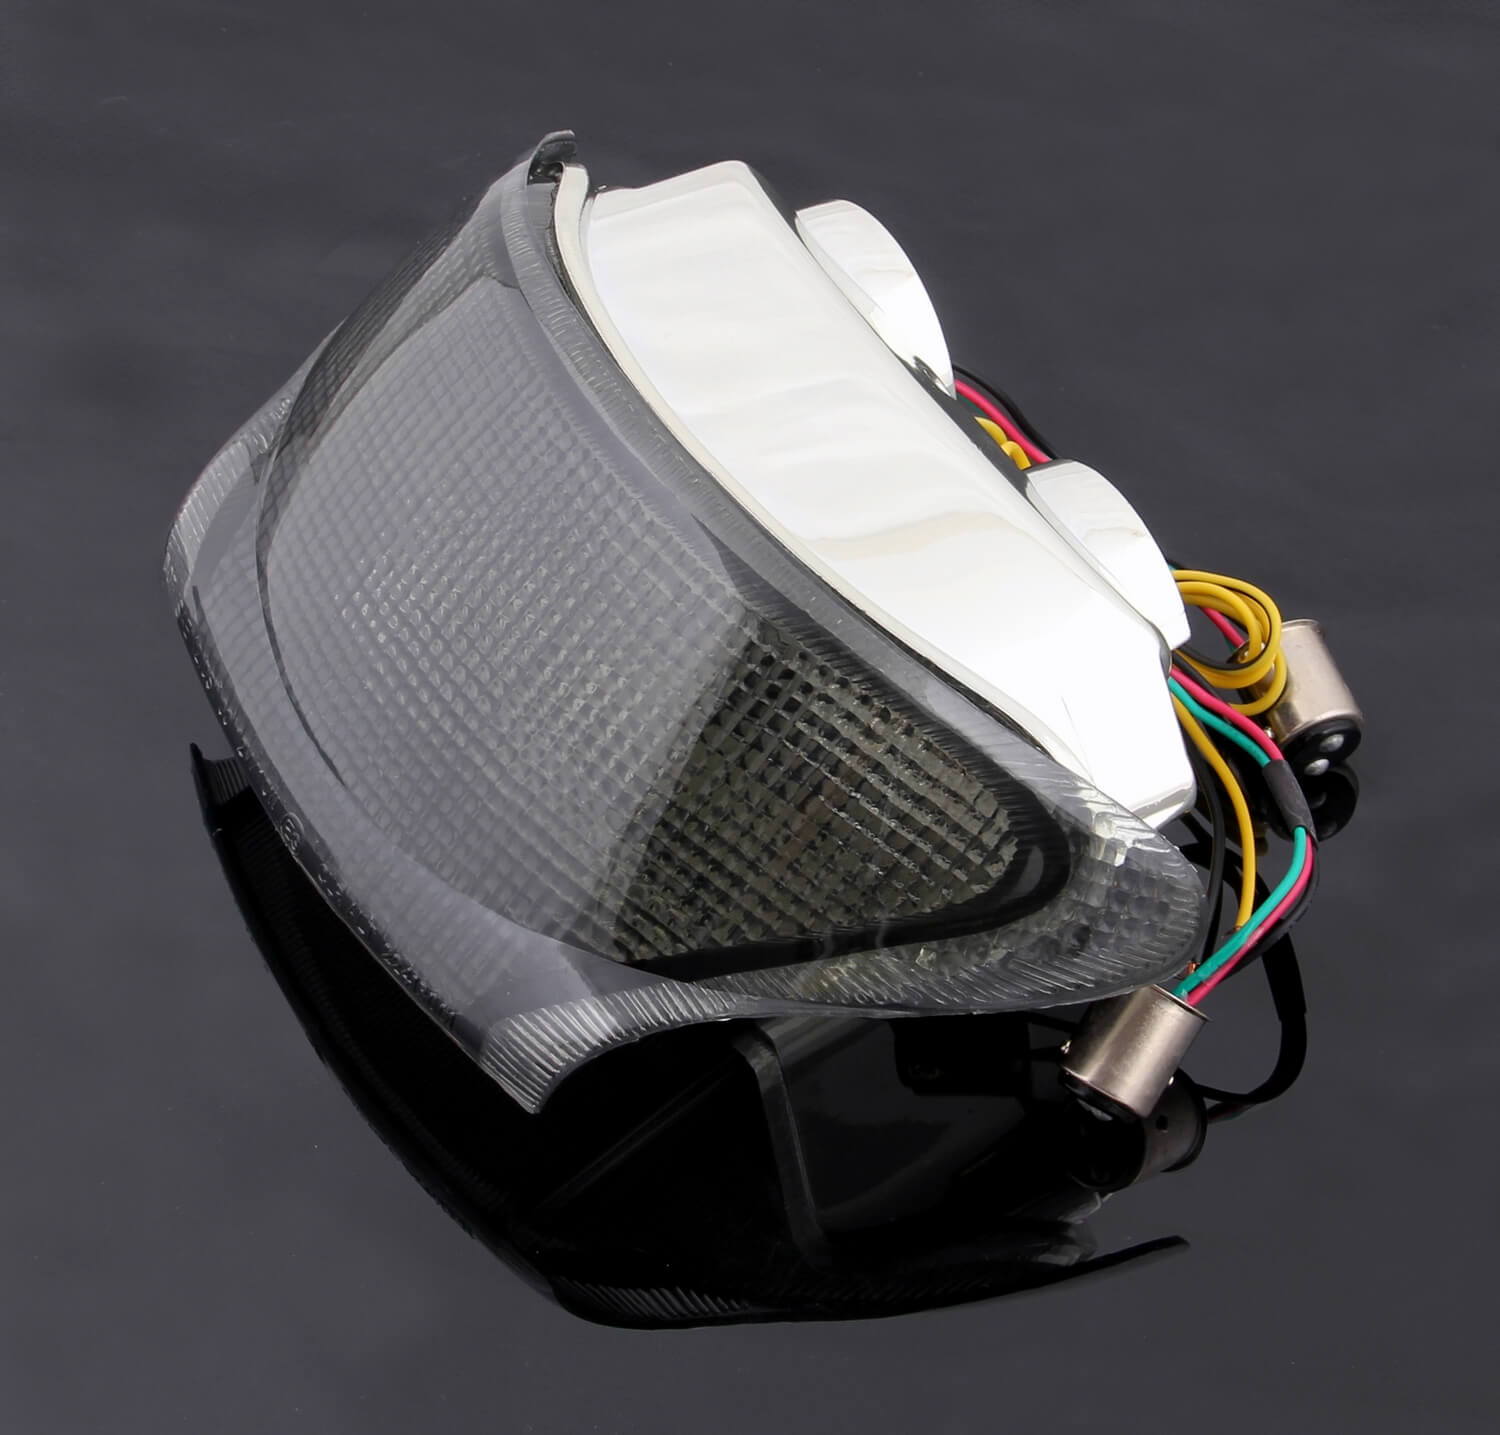 Clear Taillight integrated Turn Signals for Triumph Daytona 995 Speed Triple